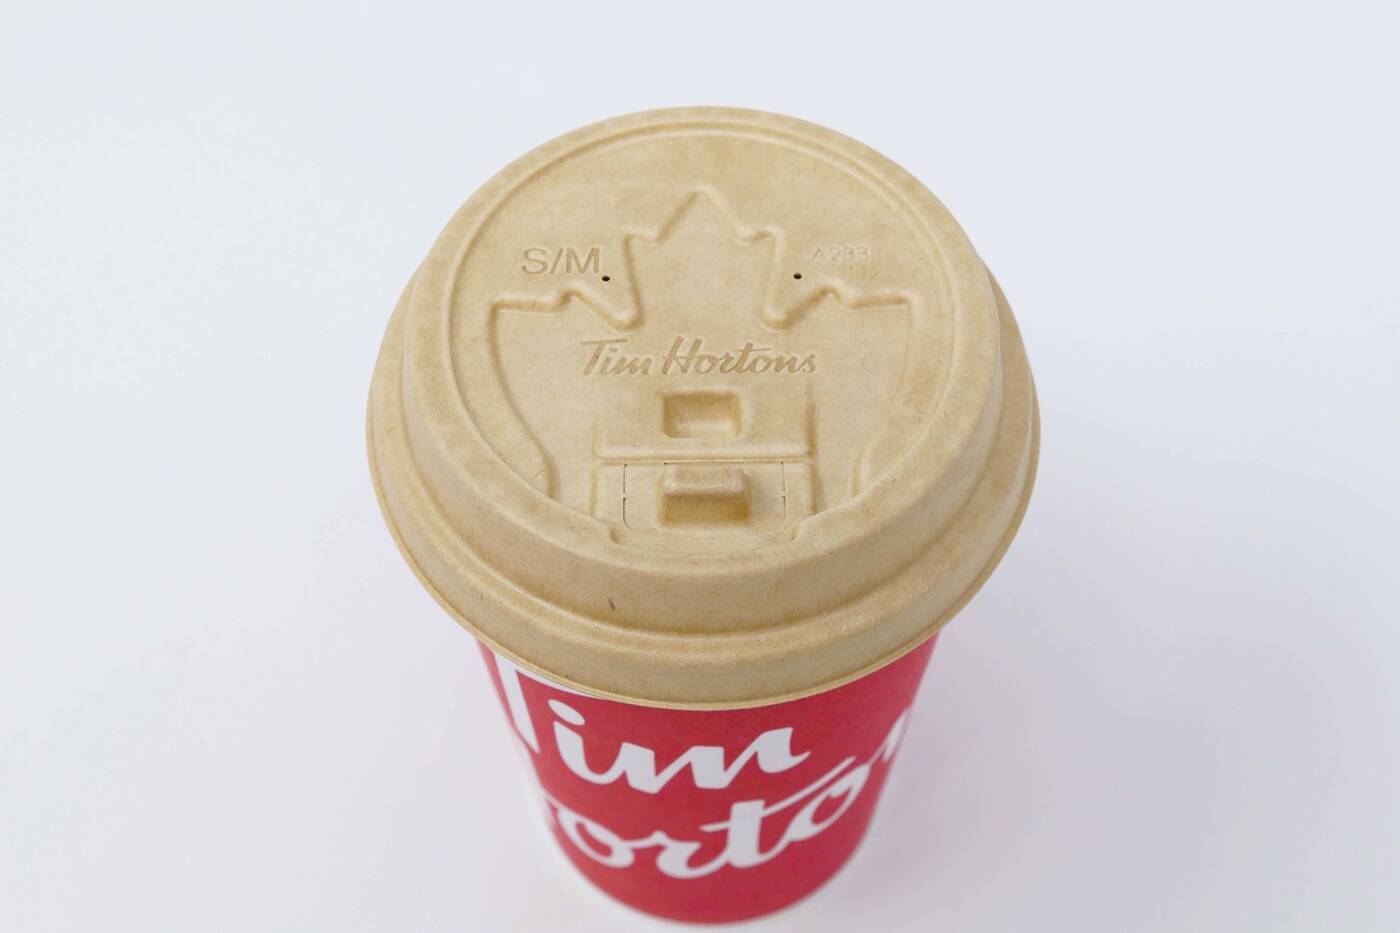 Language complaints exploded in 2022, Tim Hortons tops list